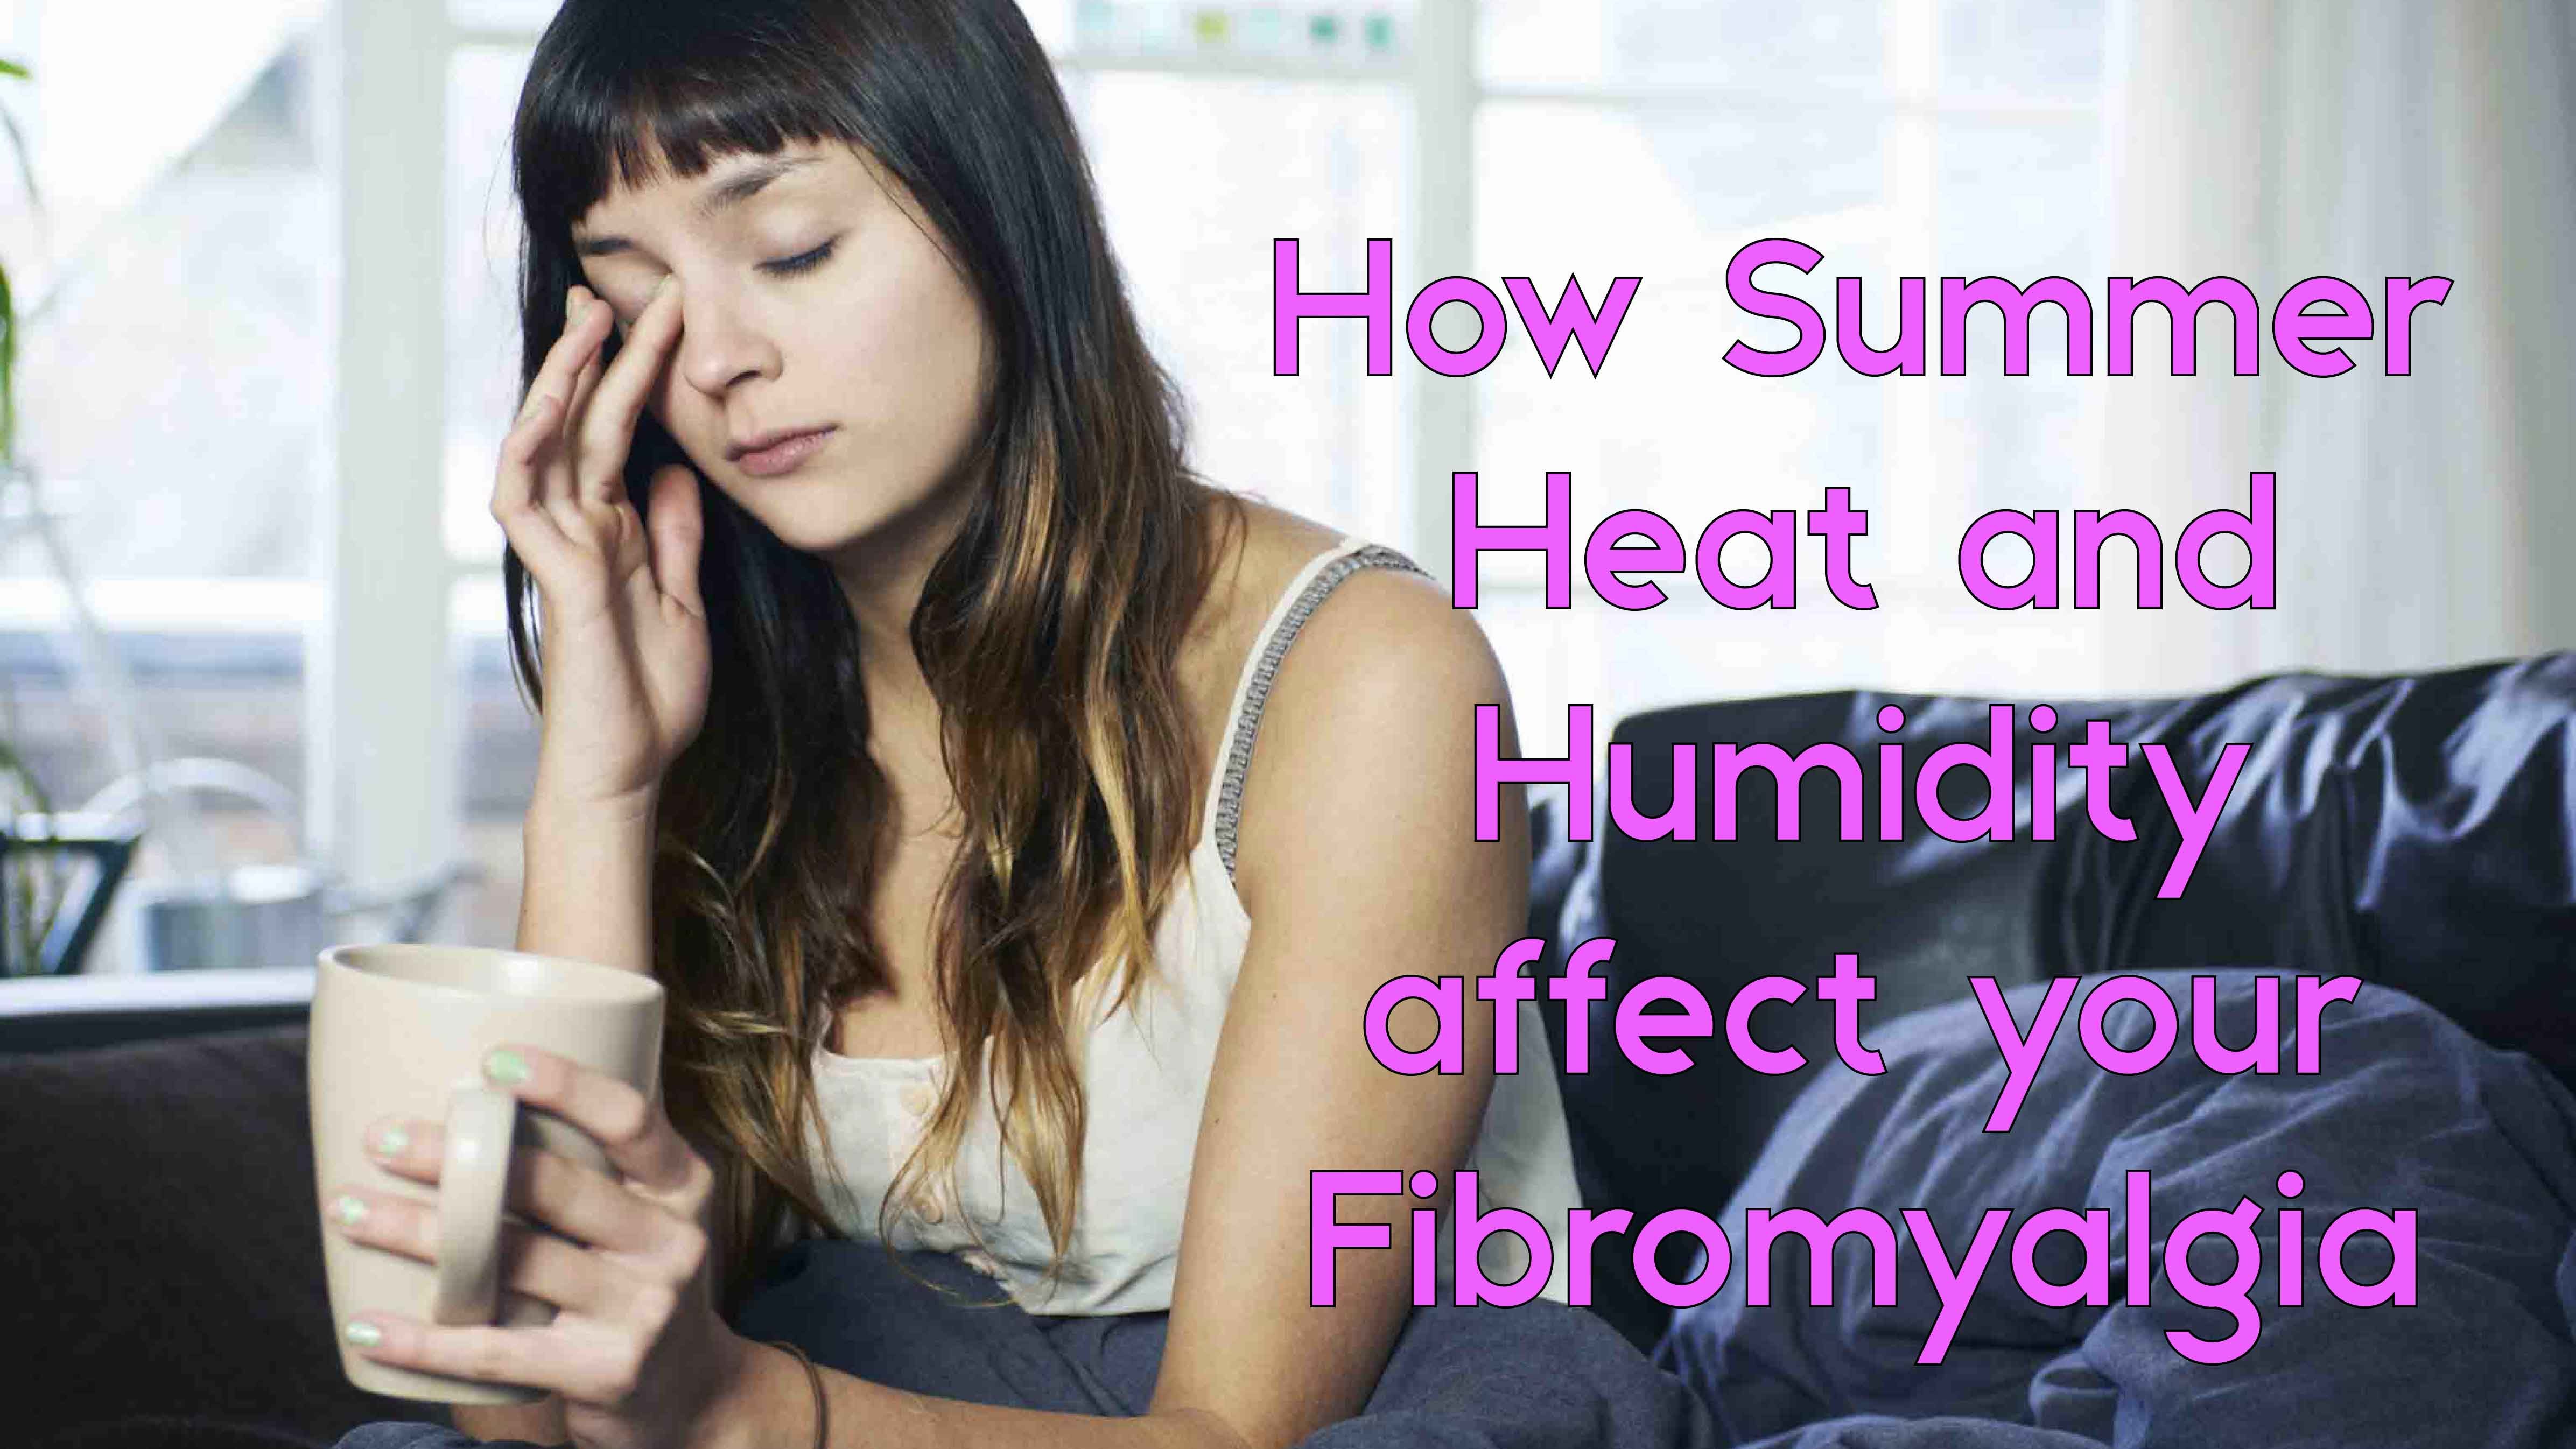 How Summer Heat and Humidity affect your Fibromyalgia